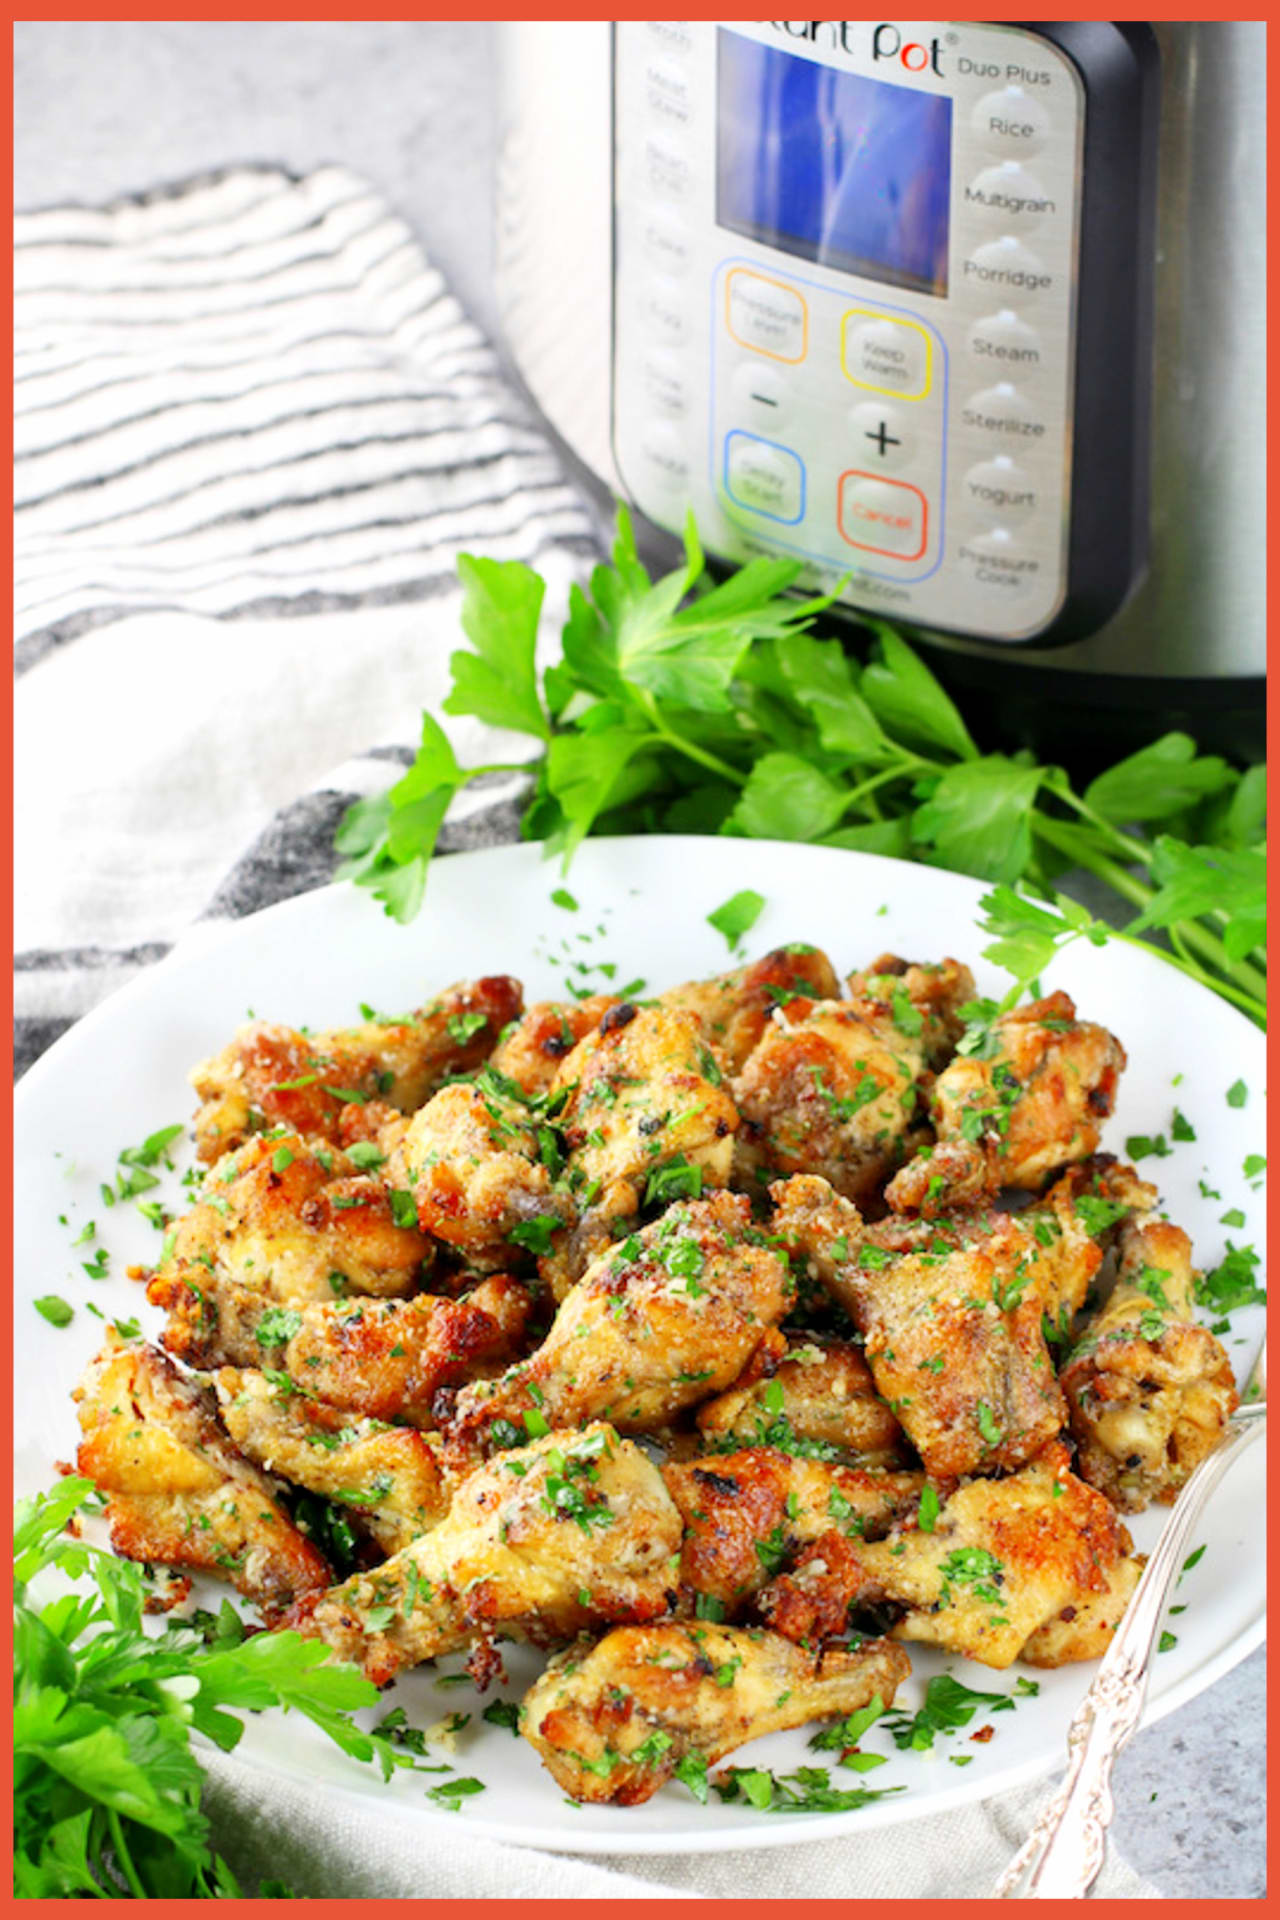 Instant Pot Chicken Recipes For Easy Weeknight Dinners - Super simple Instant Pot chicken wings for easy meals or easy party appextizers